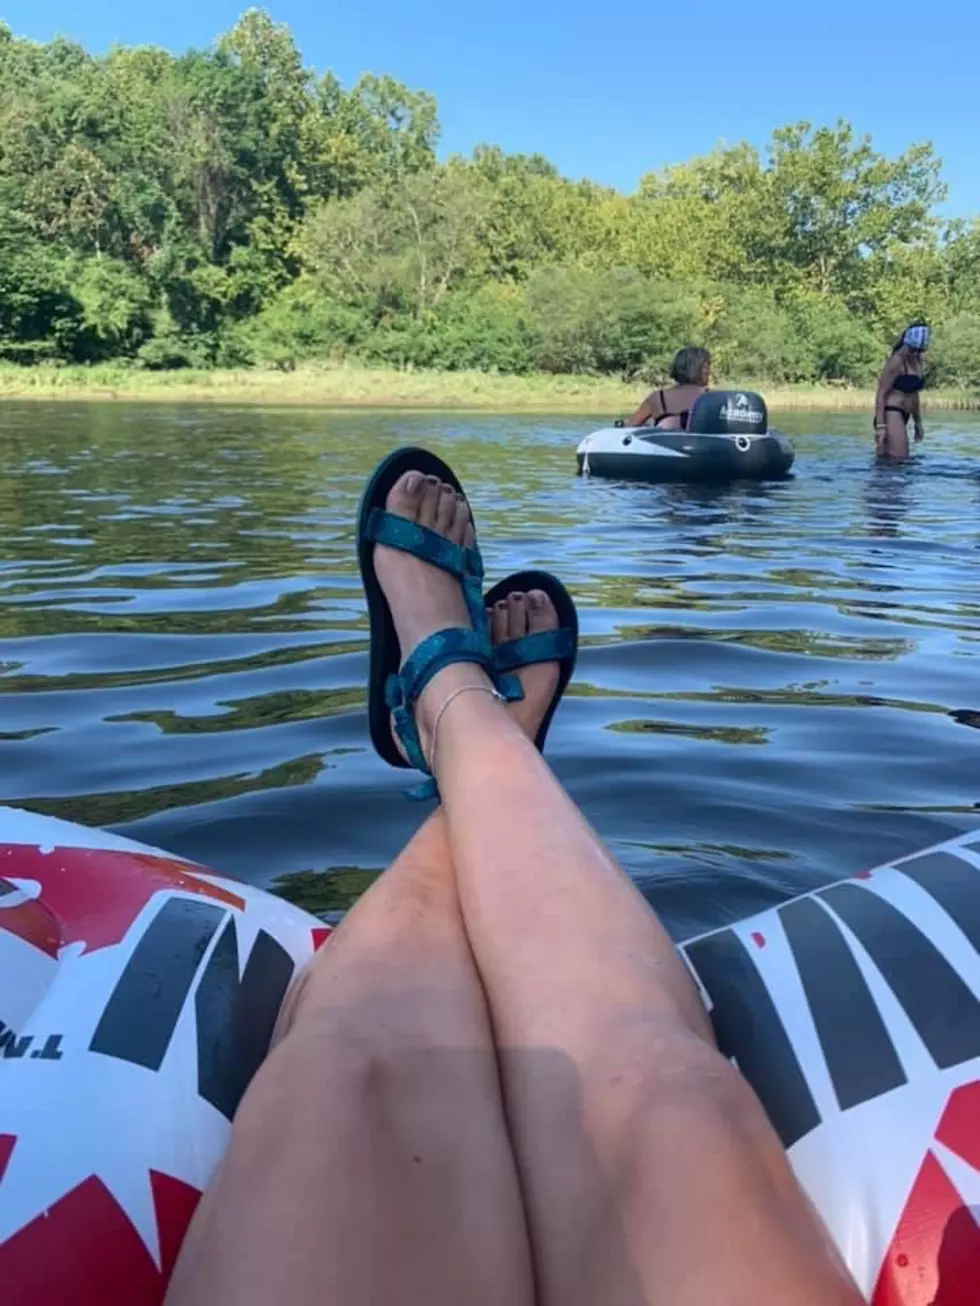 Going Floating this Weekend? You Need this Amazing Motorized Tube